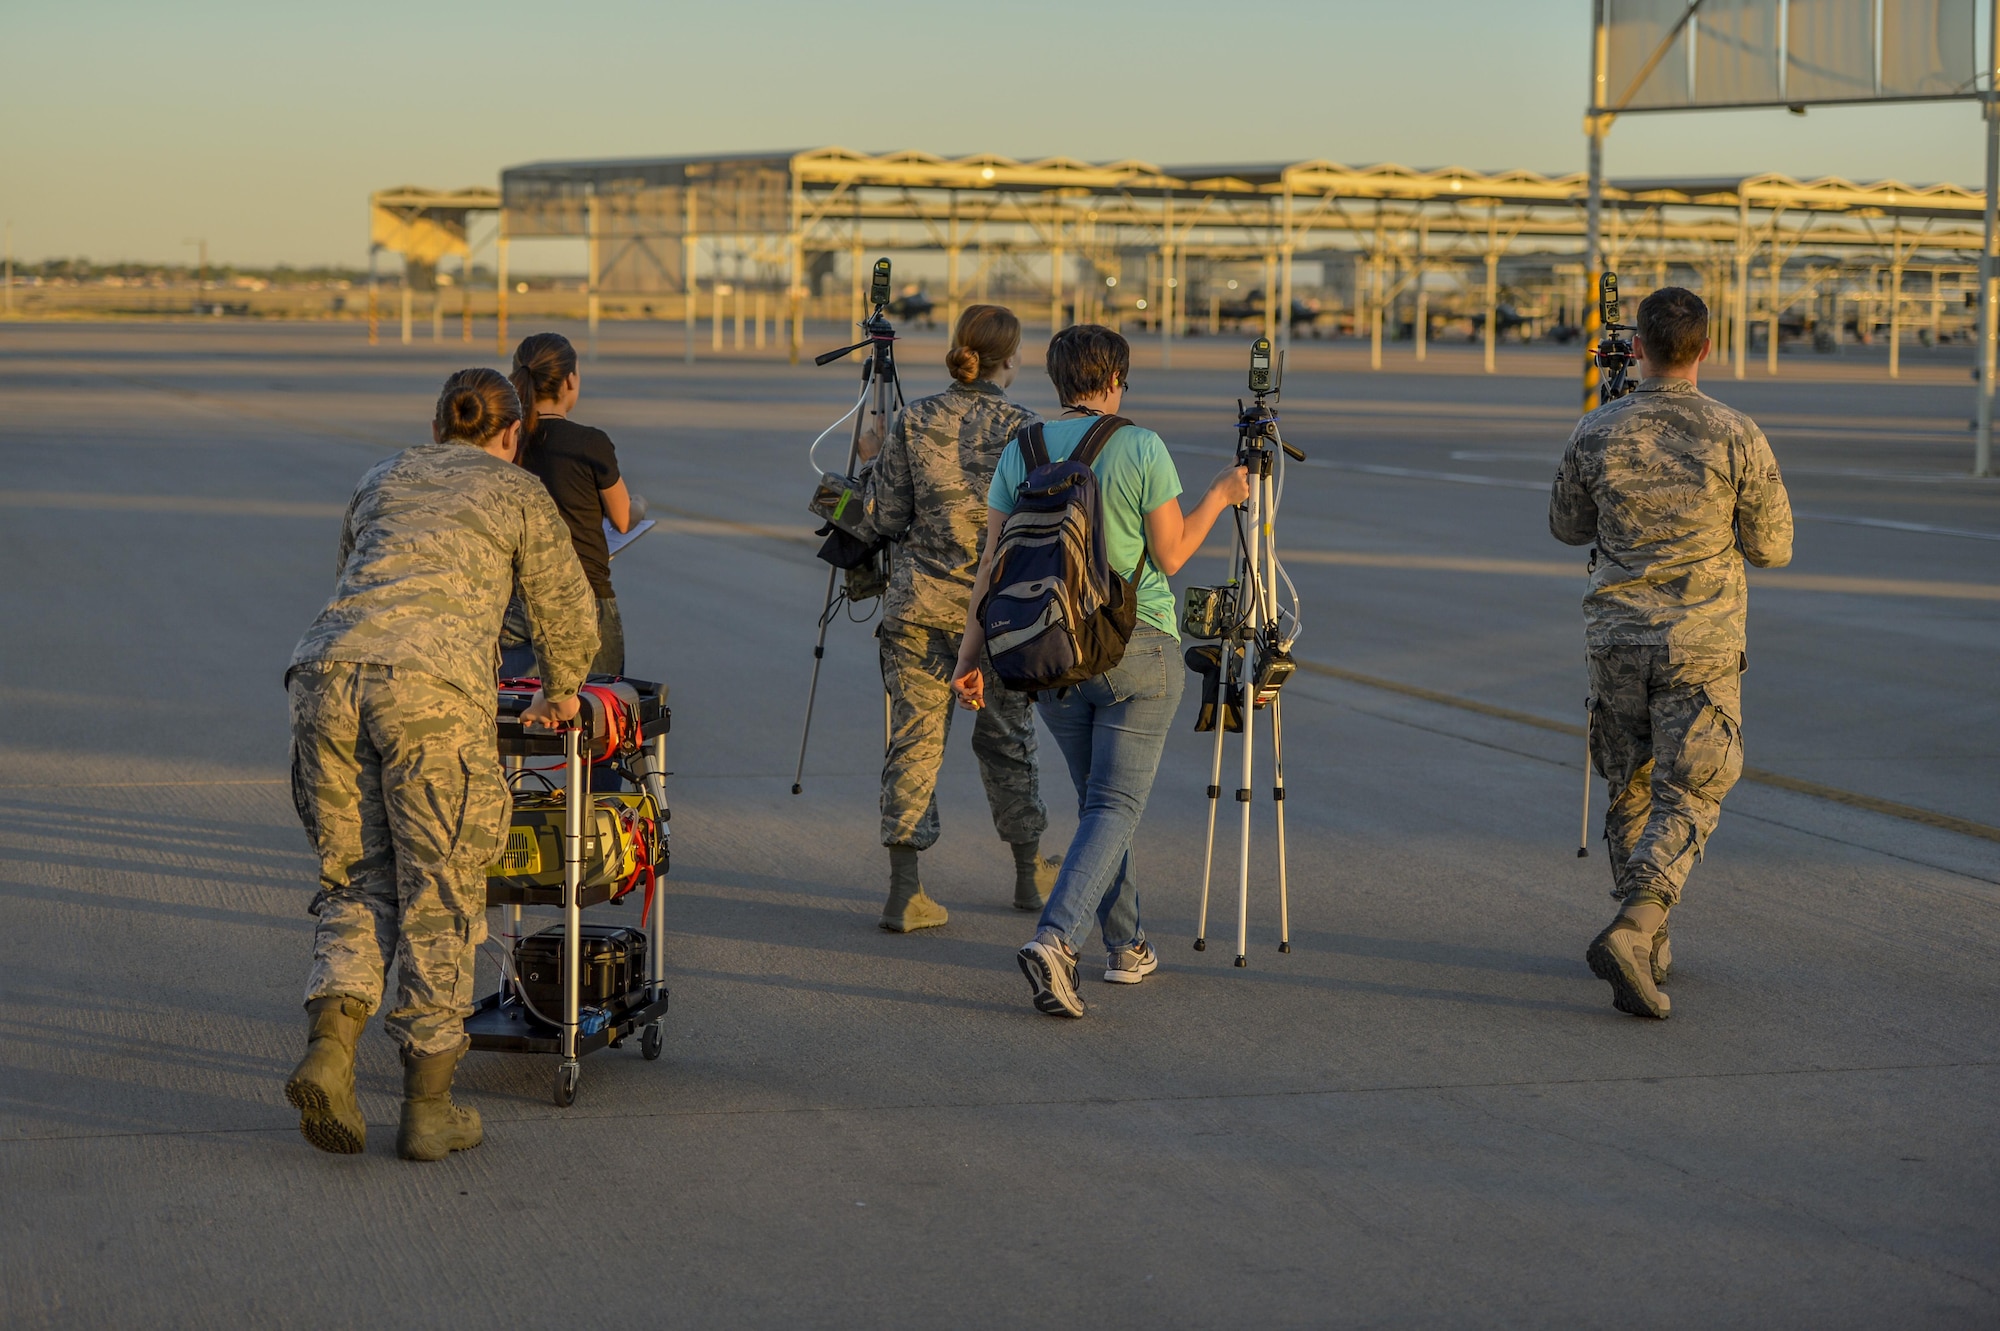 Members of Team Luke and Airmen from the USAF School of Aerospace Medicine relocated equipment on the flightline to perform air quality testing at Luke Air Force Base, Ariz., Sept. 20, 2017. The team members from the USAF School of Aerospace Medicine visited Luke for follow-up testing related to the F-35A Lightning II program. (U.S. Air Force photo/Airman 1st Class Caleb Worpel)